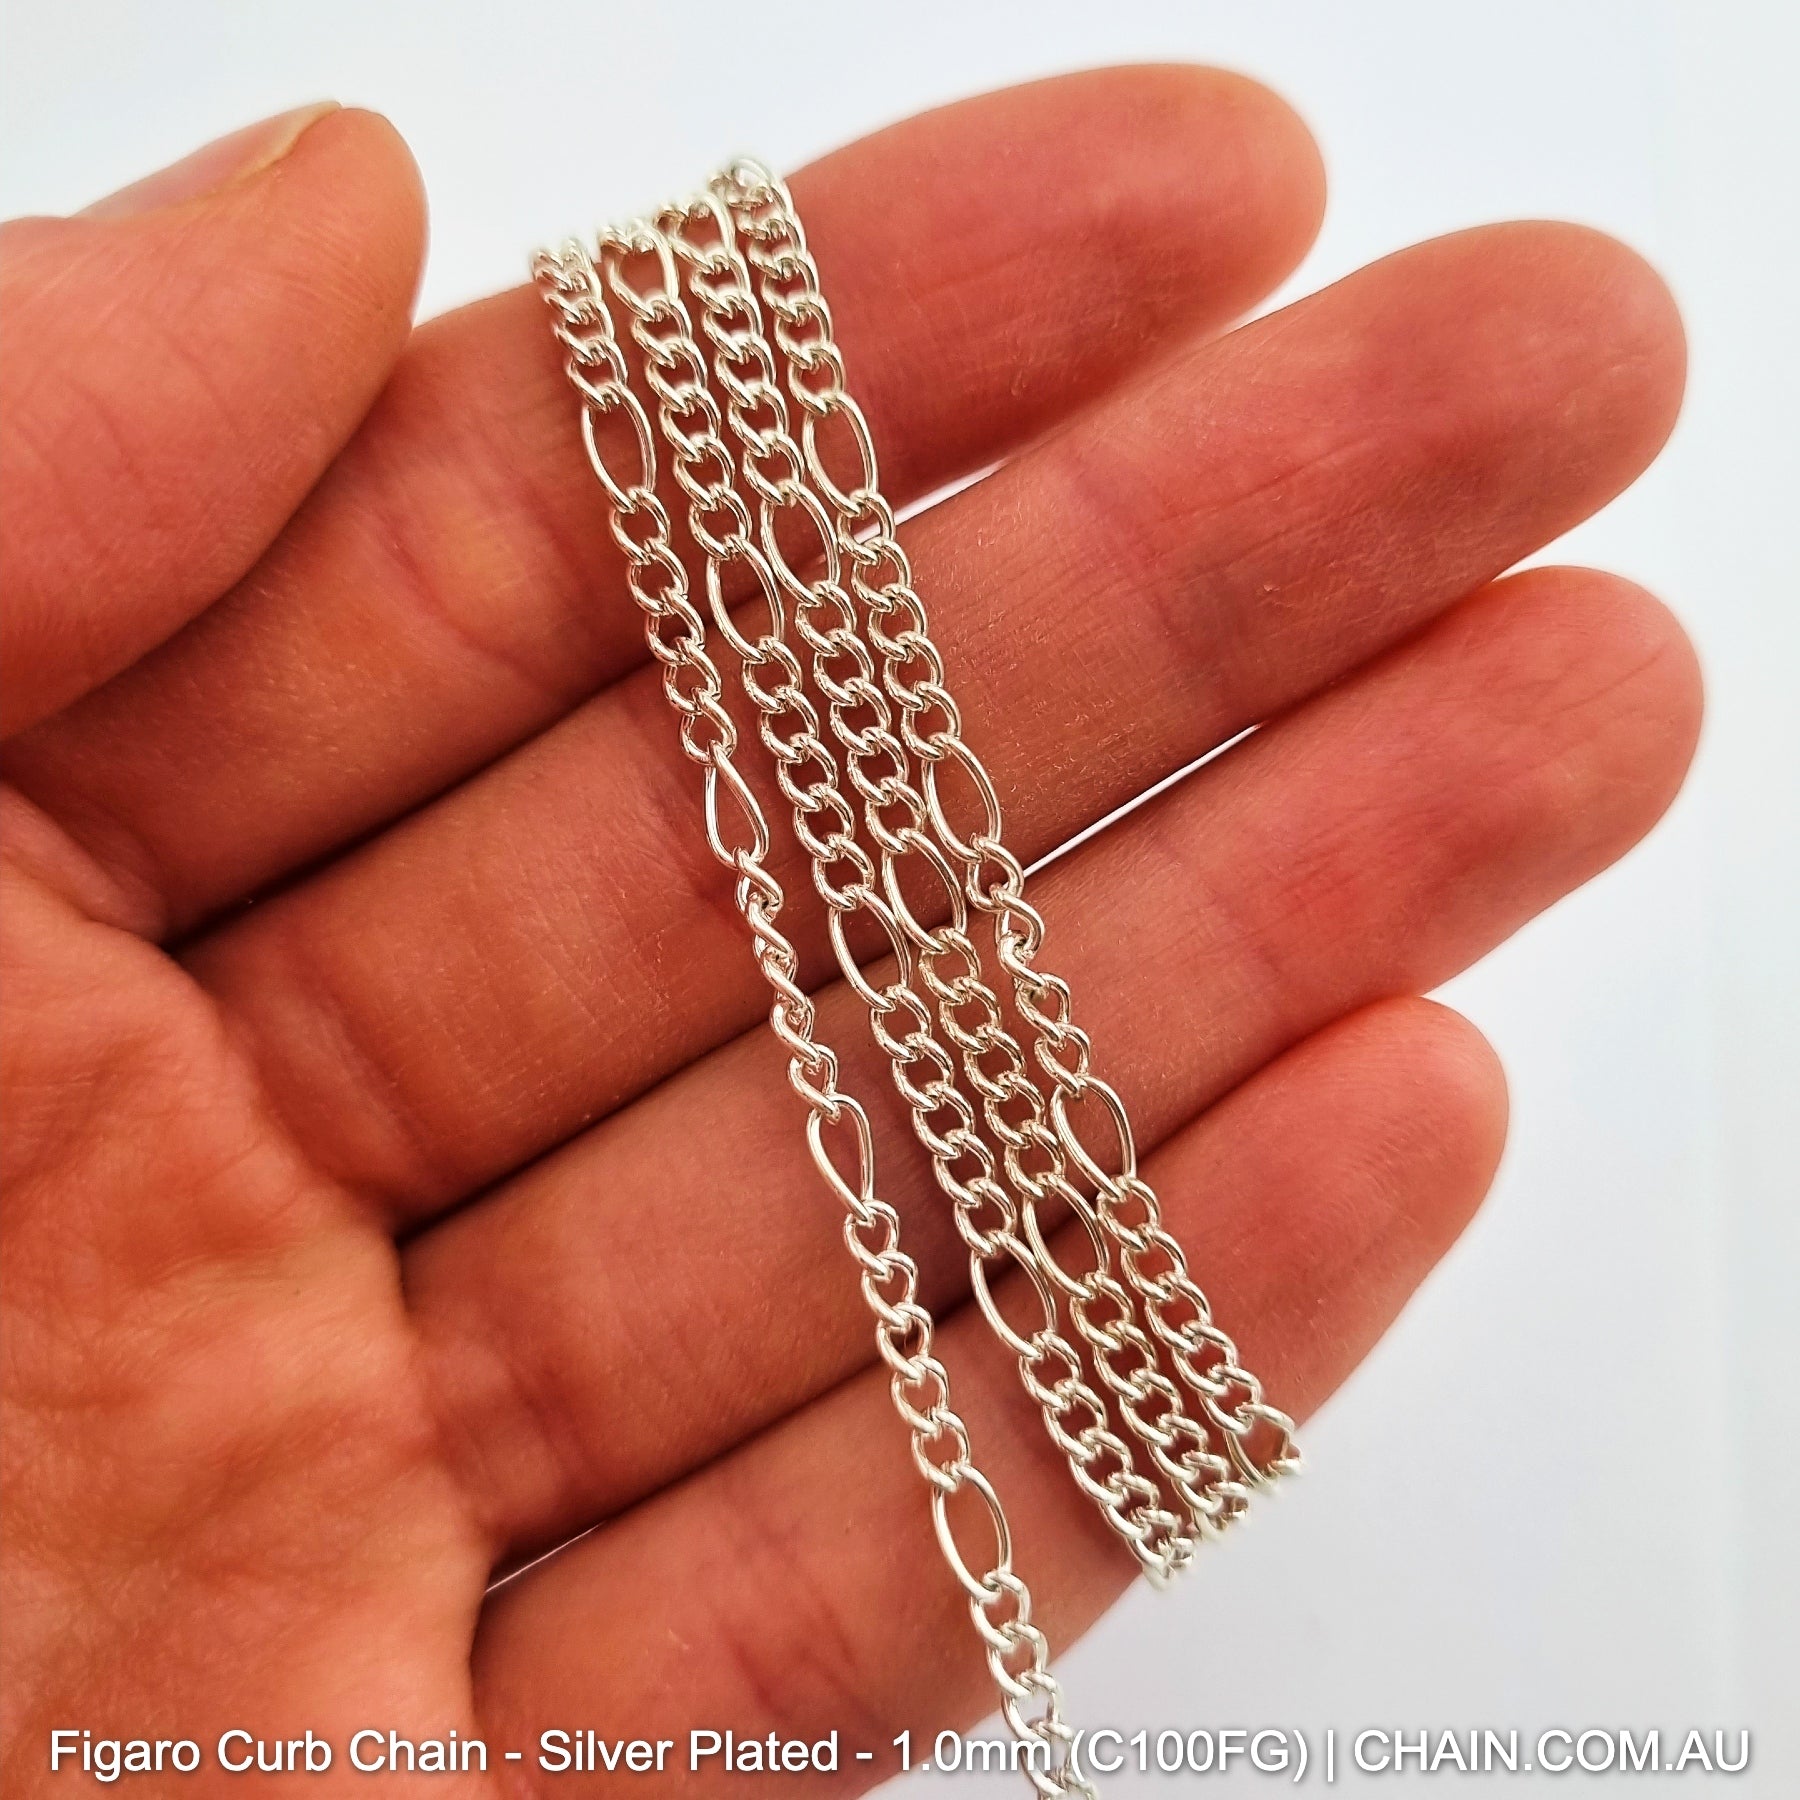 Figaro Curb Chain Silver Plated. Size: 1.0mm, C100FG. 25m Reel. Shop Jewellery Chain online. Australia wide shipping. Chain.com.au